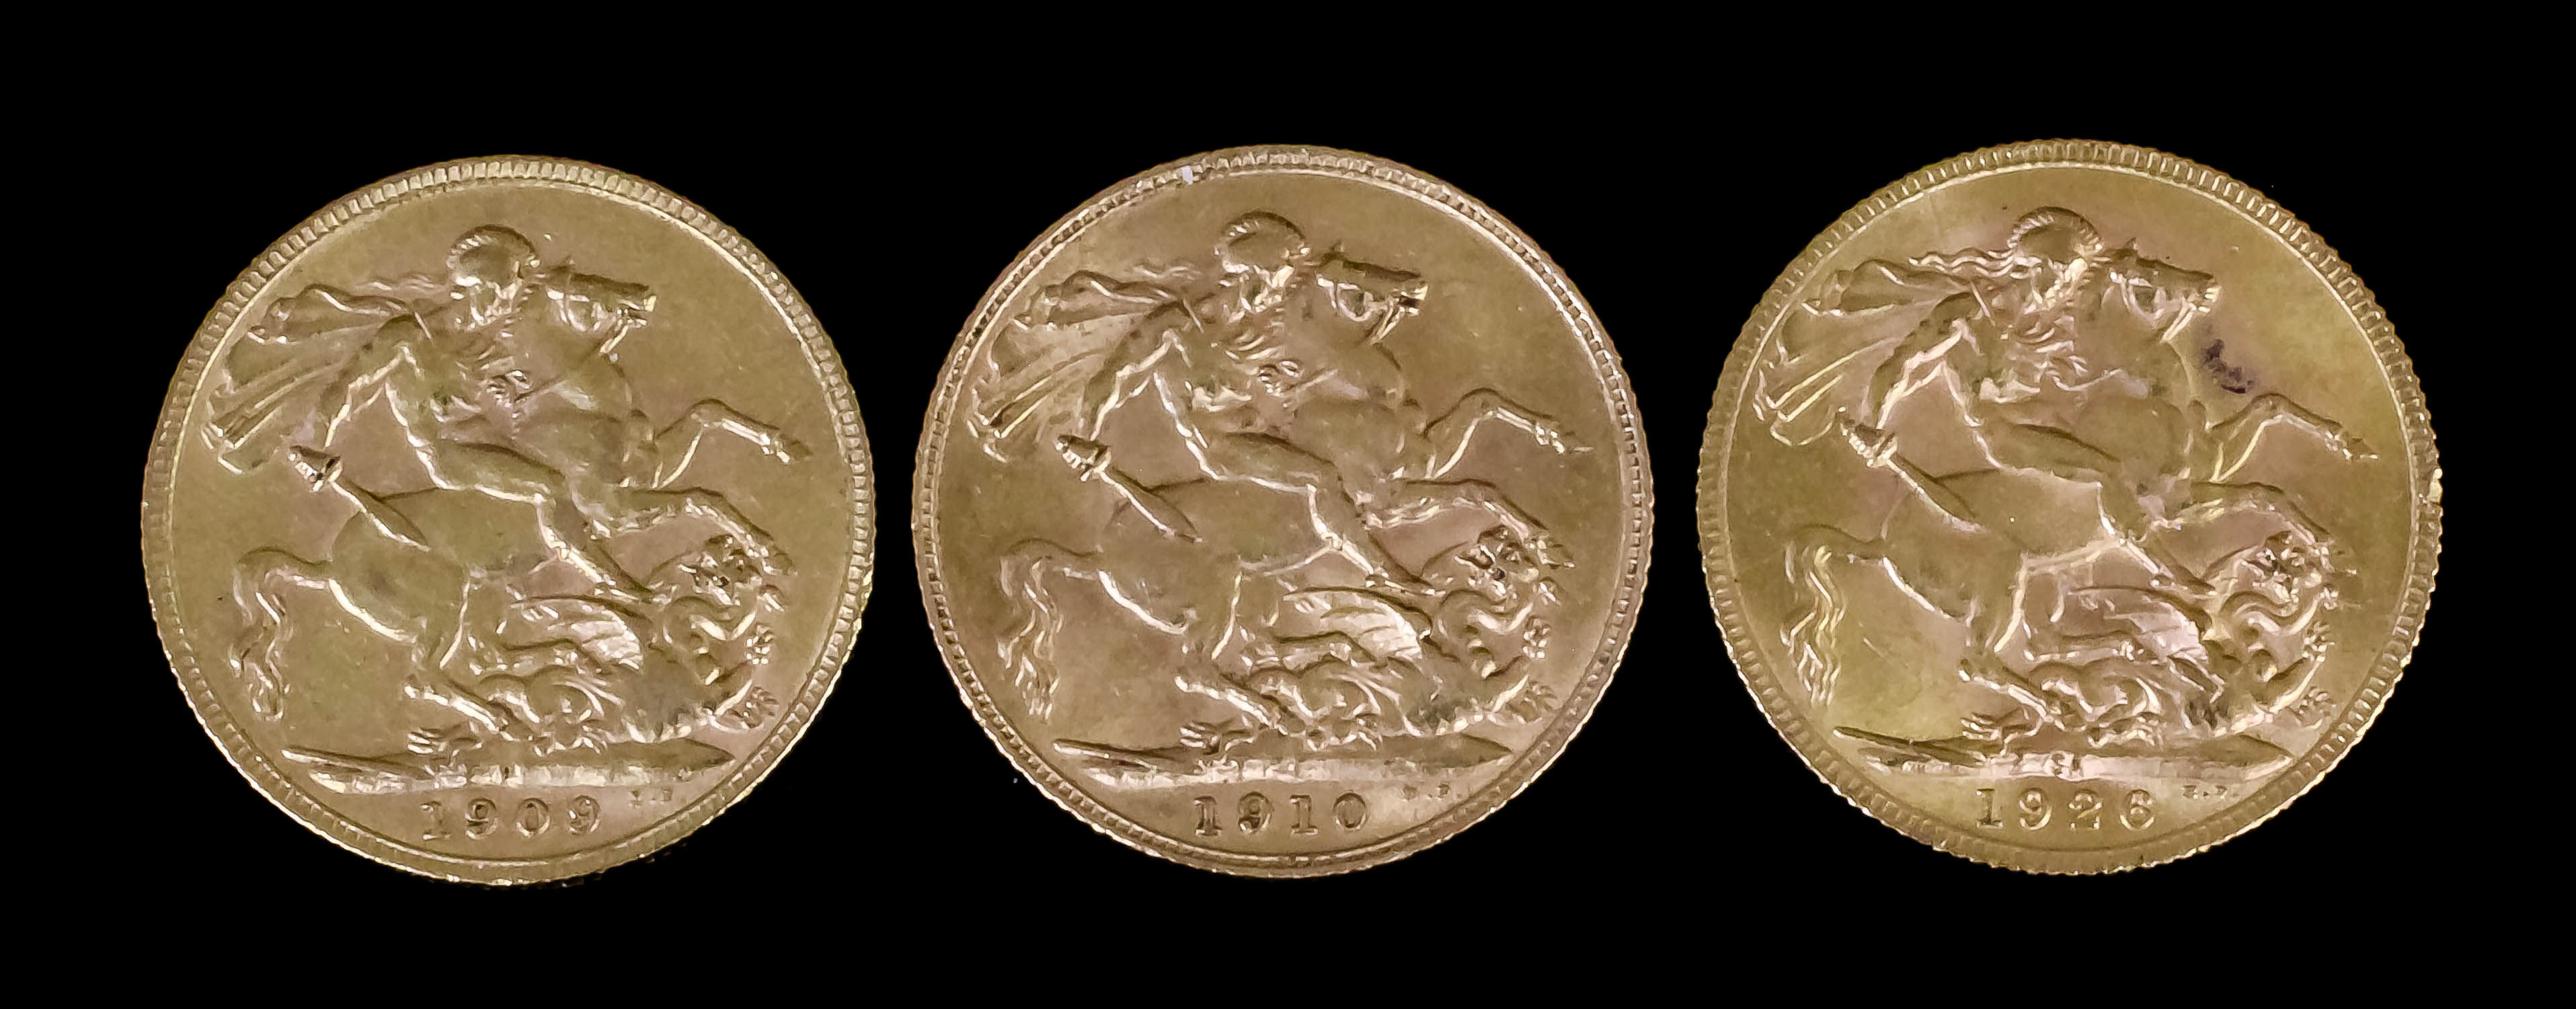 Two Edward VII 1909 and 1910 Sovereigns (Fine with slight edge knocks) and a George V 1926 Sovereign